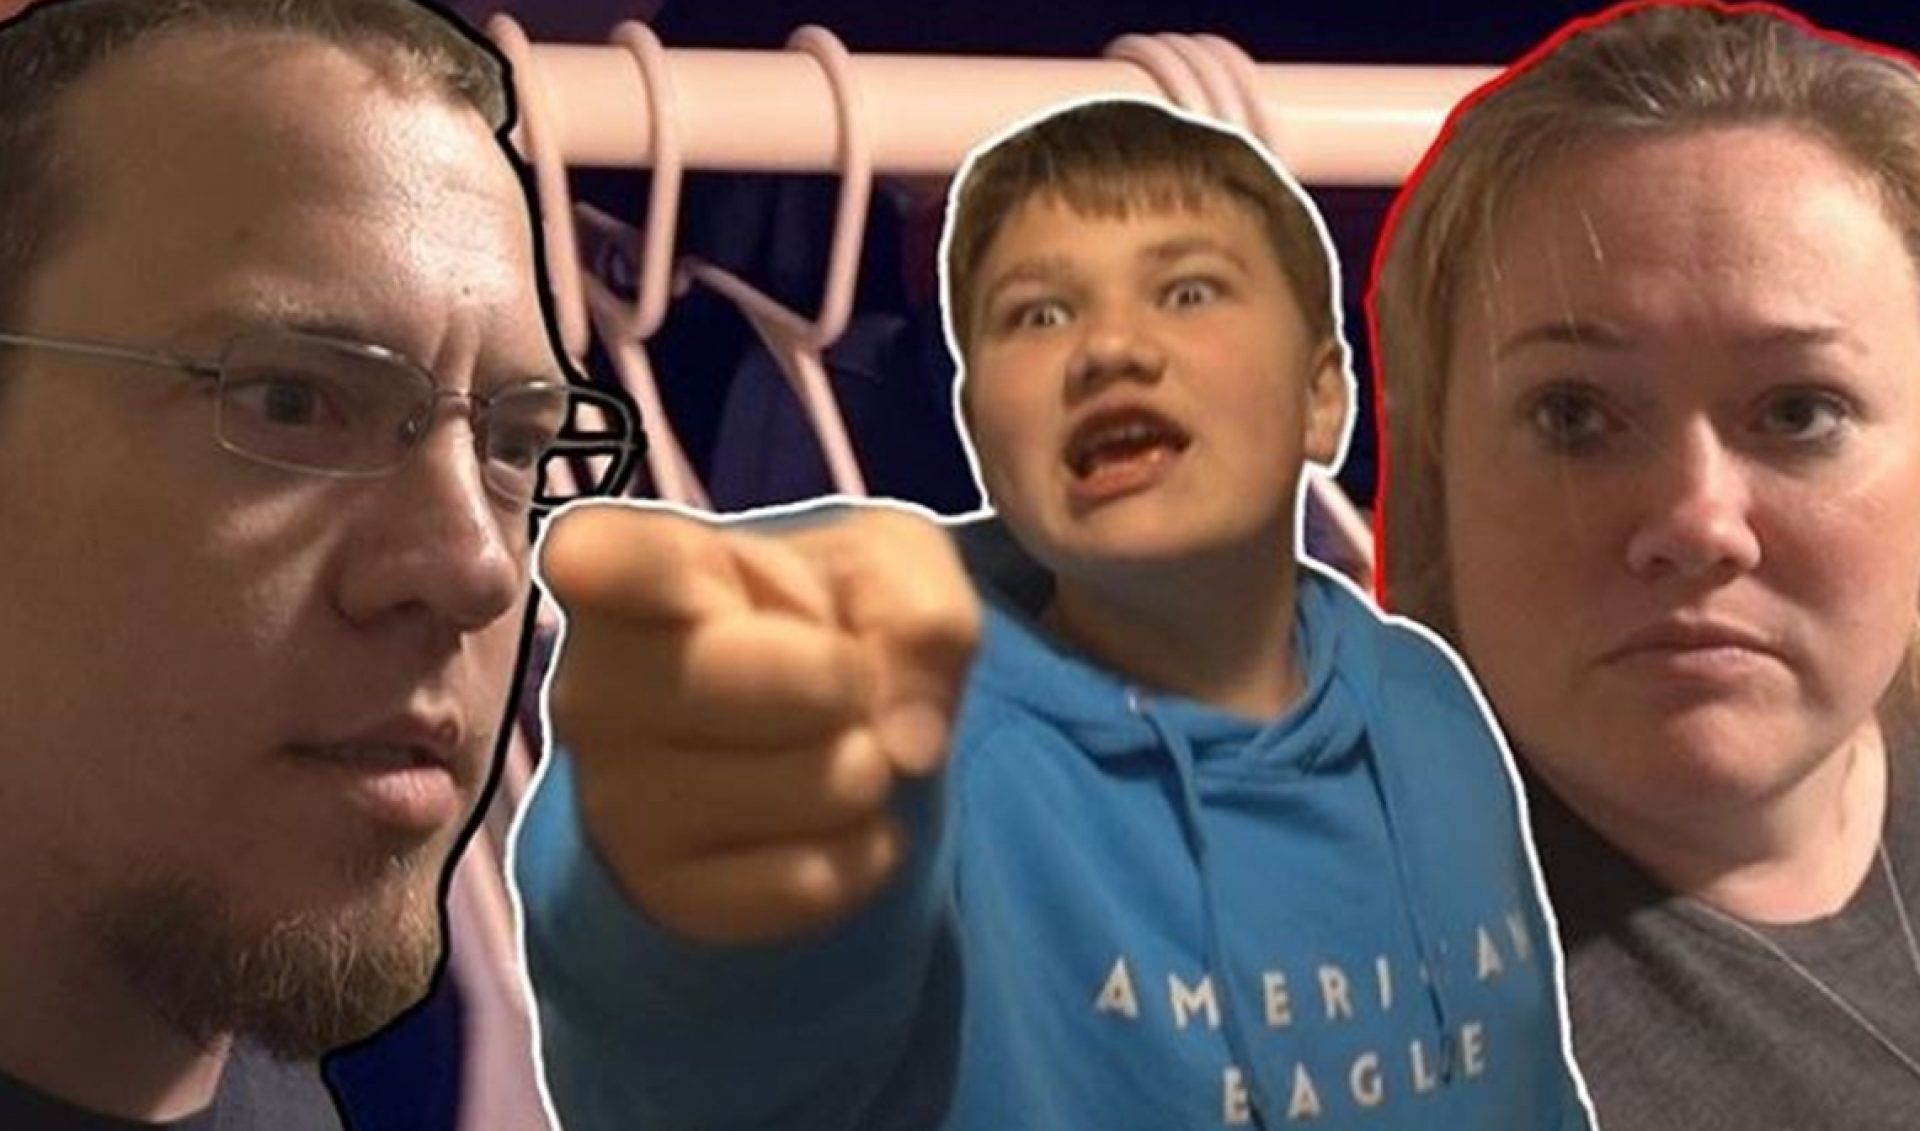 YouTube Finally Terminates Channels Belonging To Notorious ‘DaddyOFive’ Parents